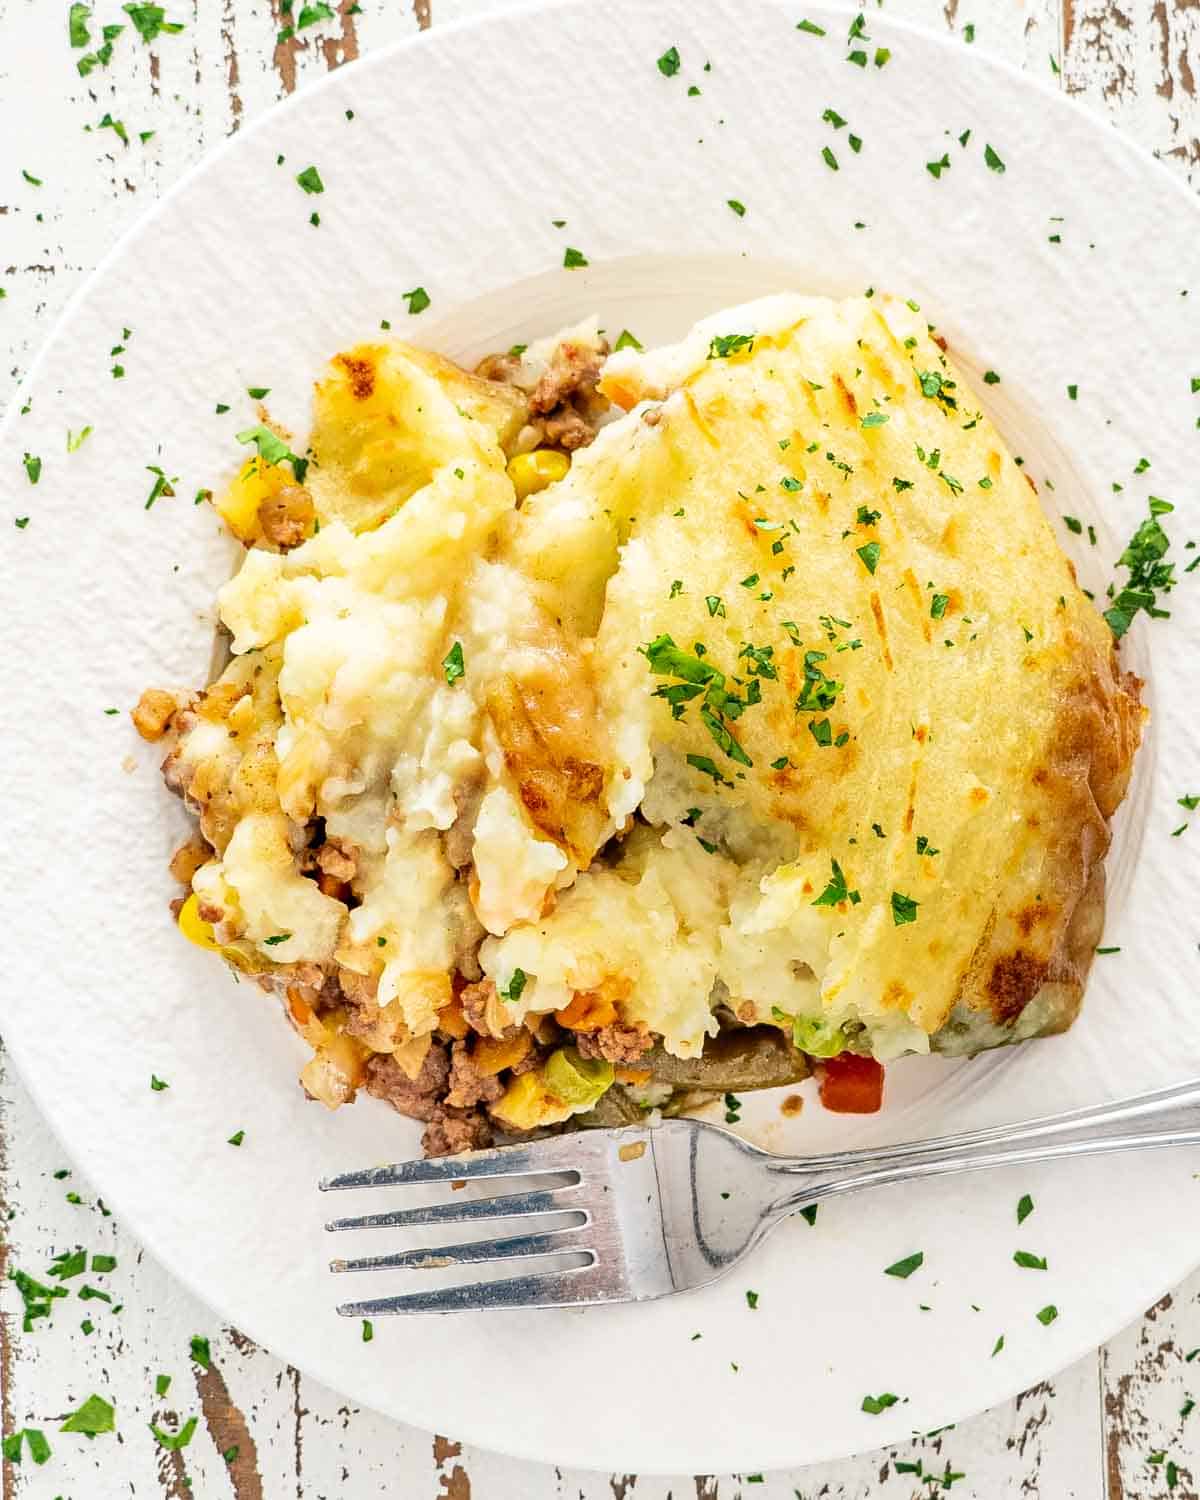 a serving of shepherd's pie in a white plate with a fork.